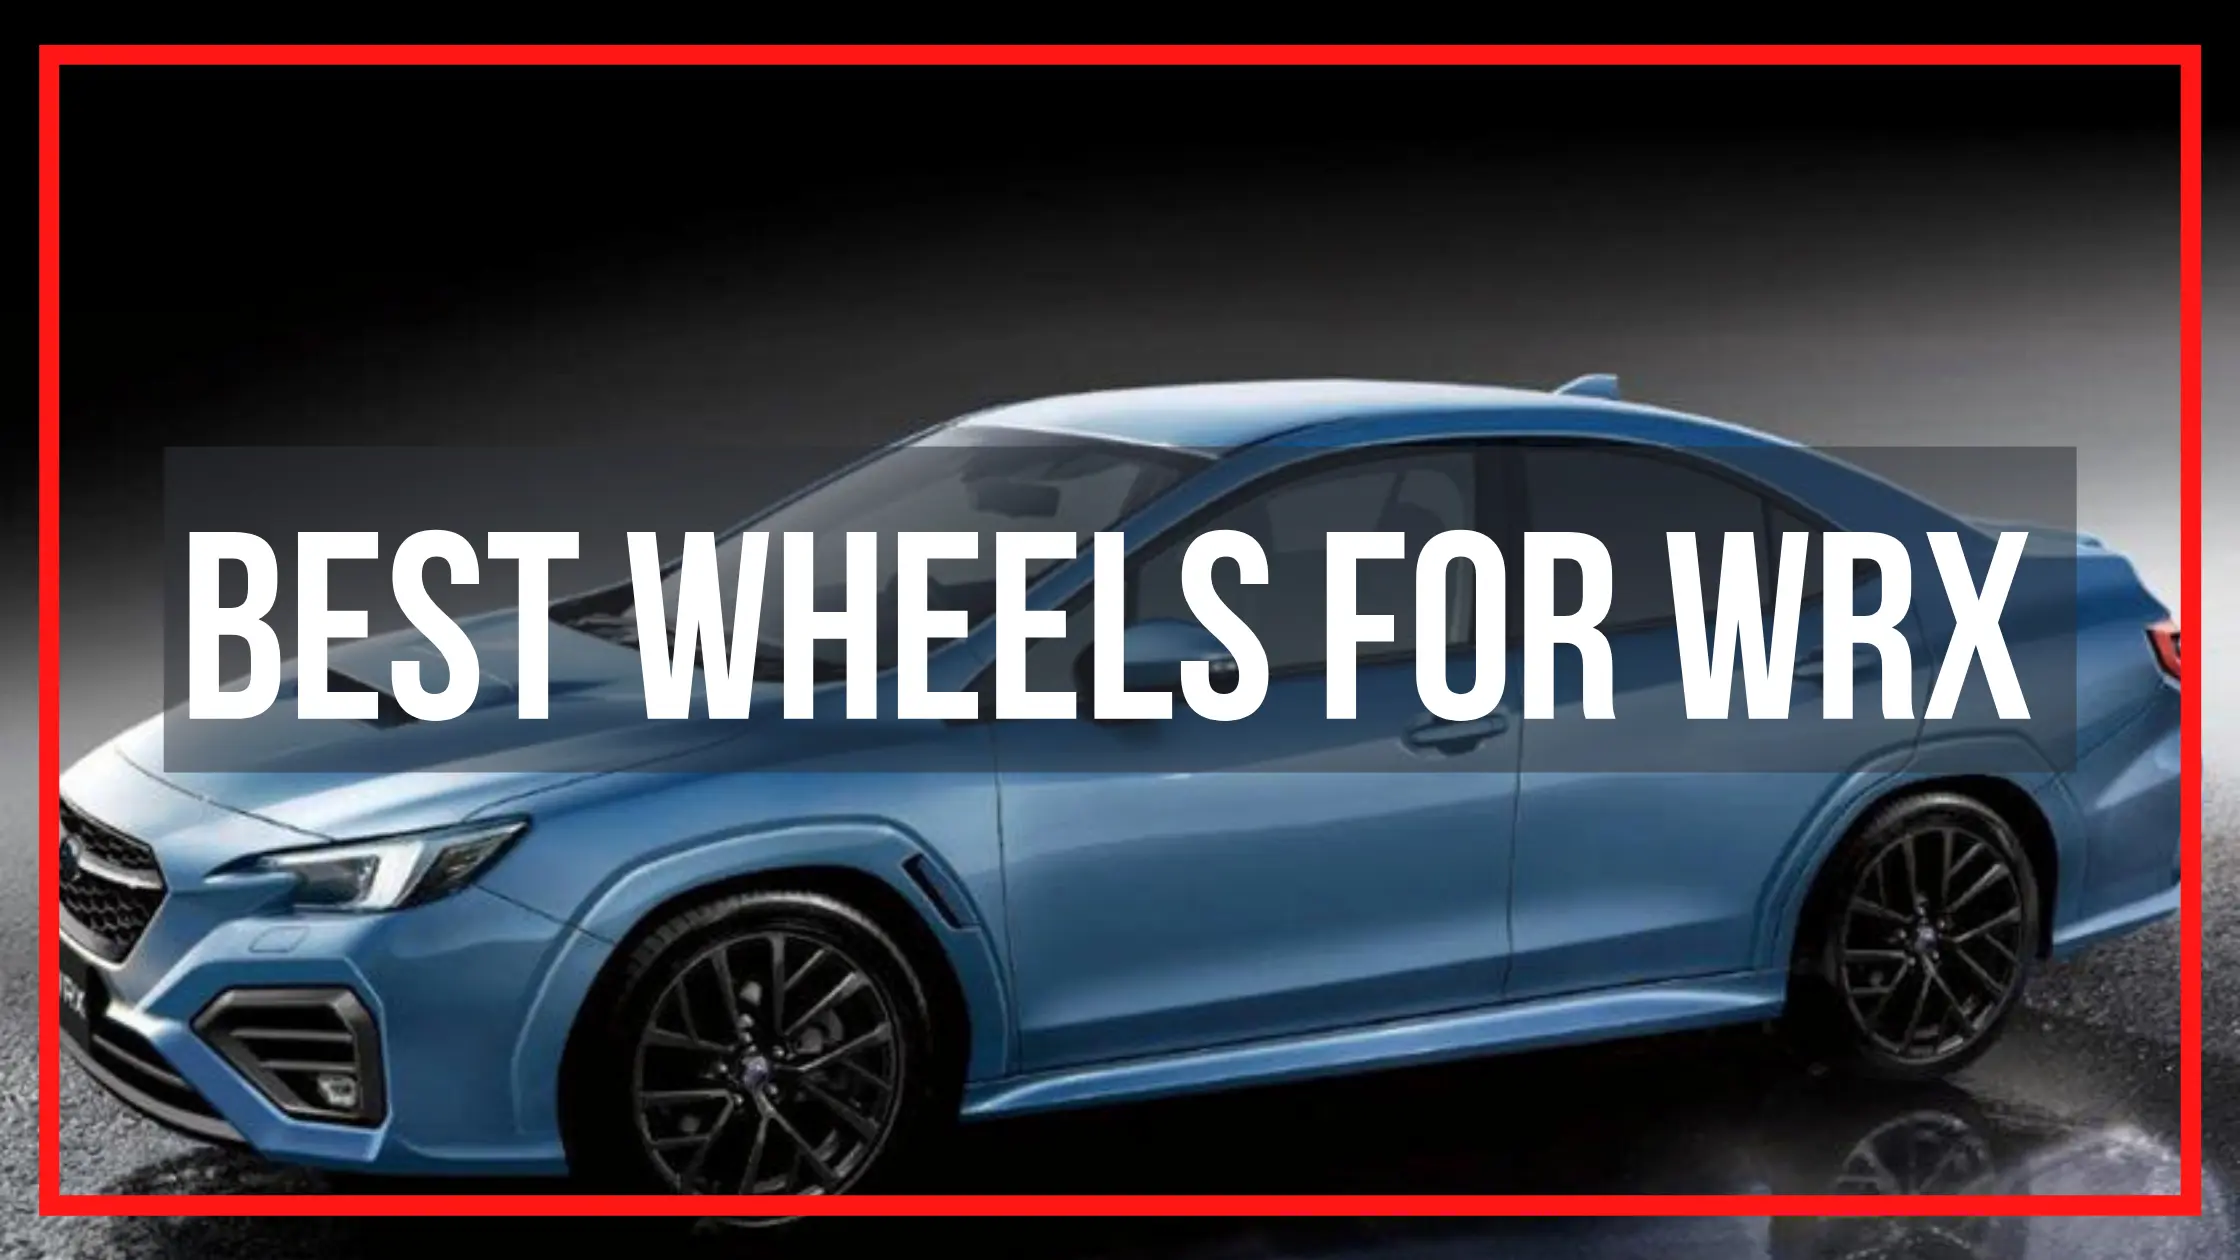 5 Best Wheels For Wrx To Give Your Car Ultimate Look In 2023